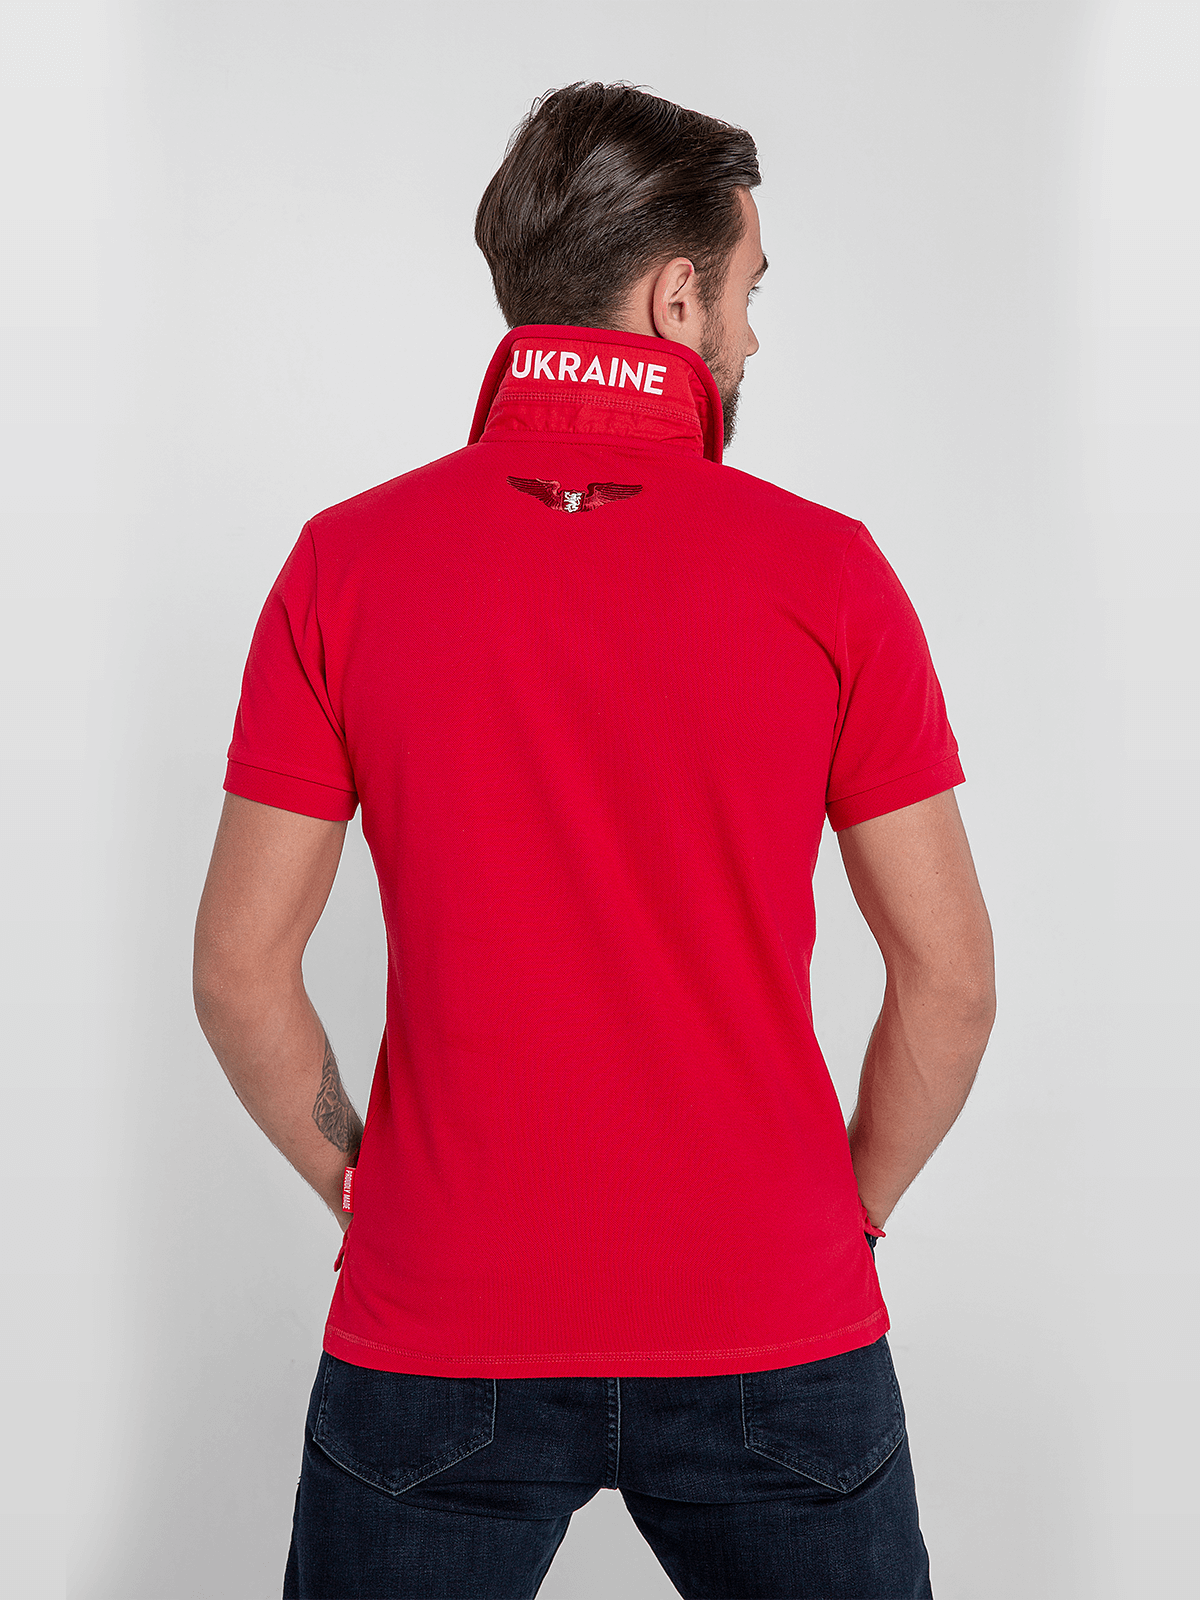 Men's Polo Shirt Wings. Color red. 1.